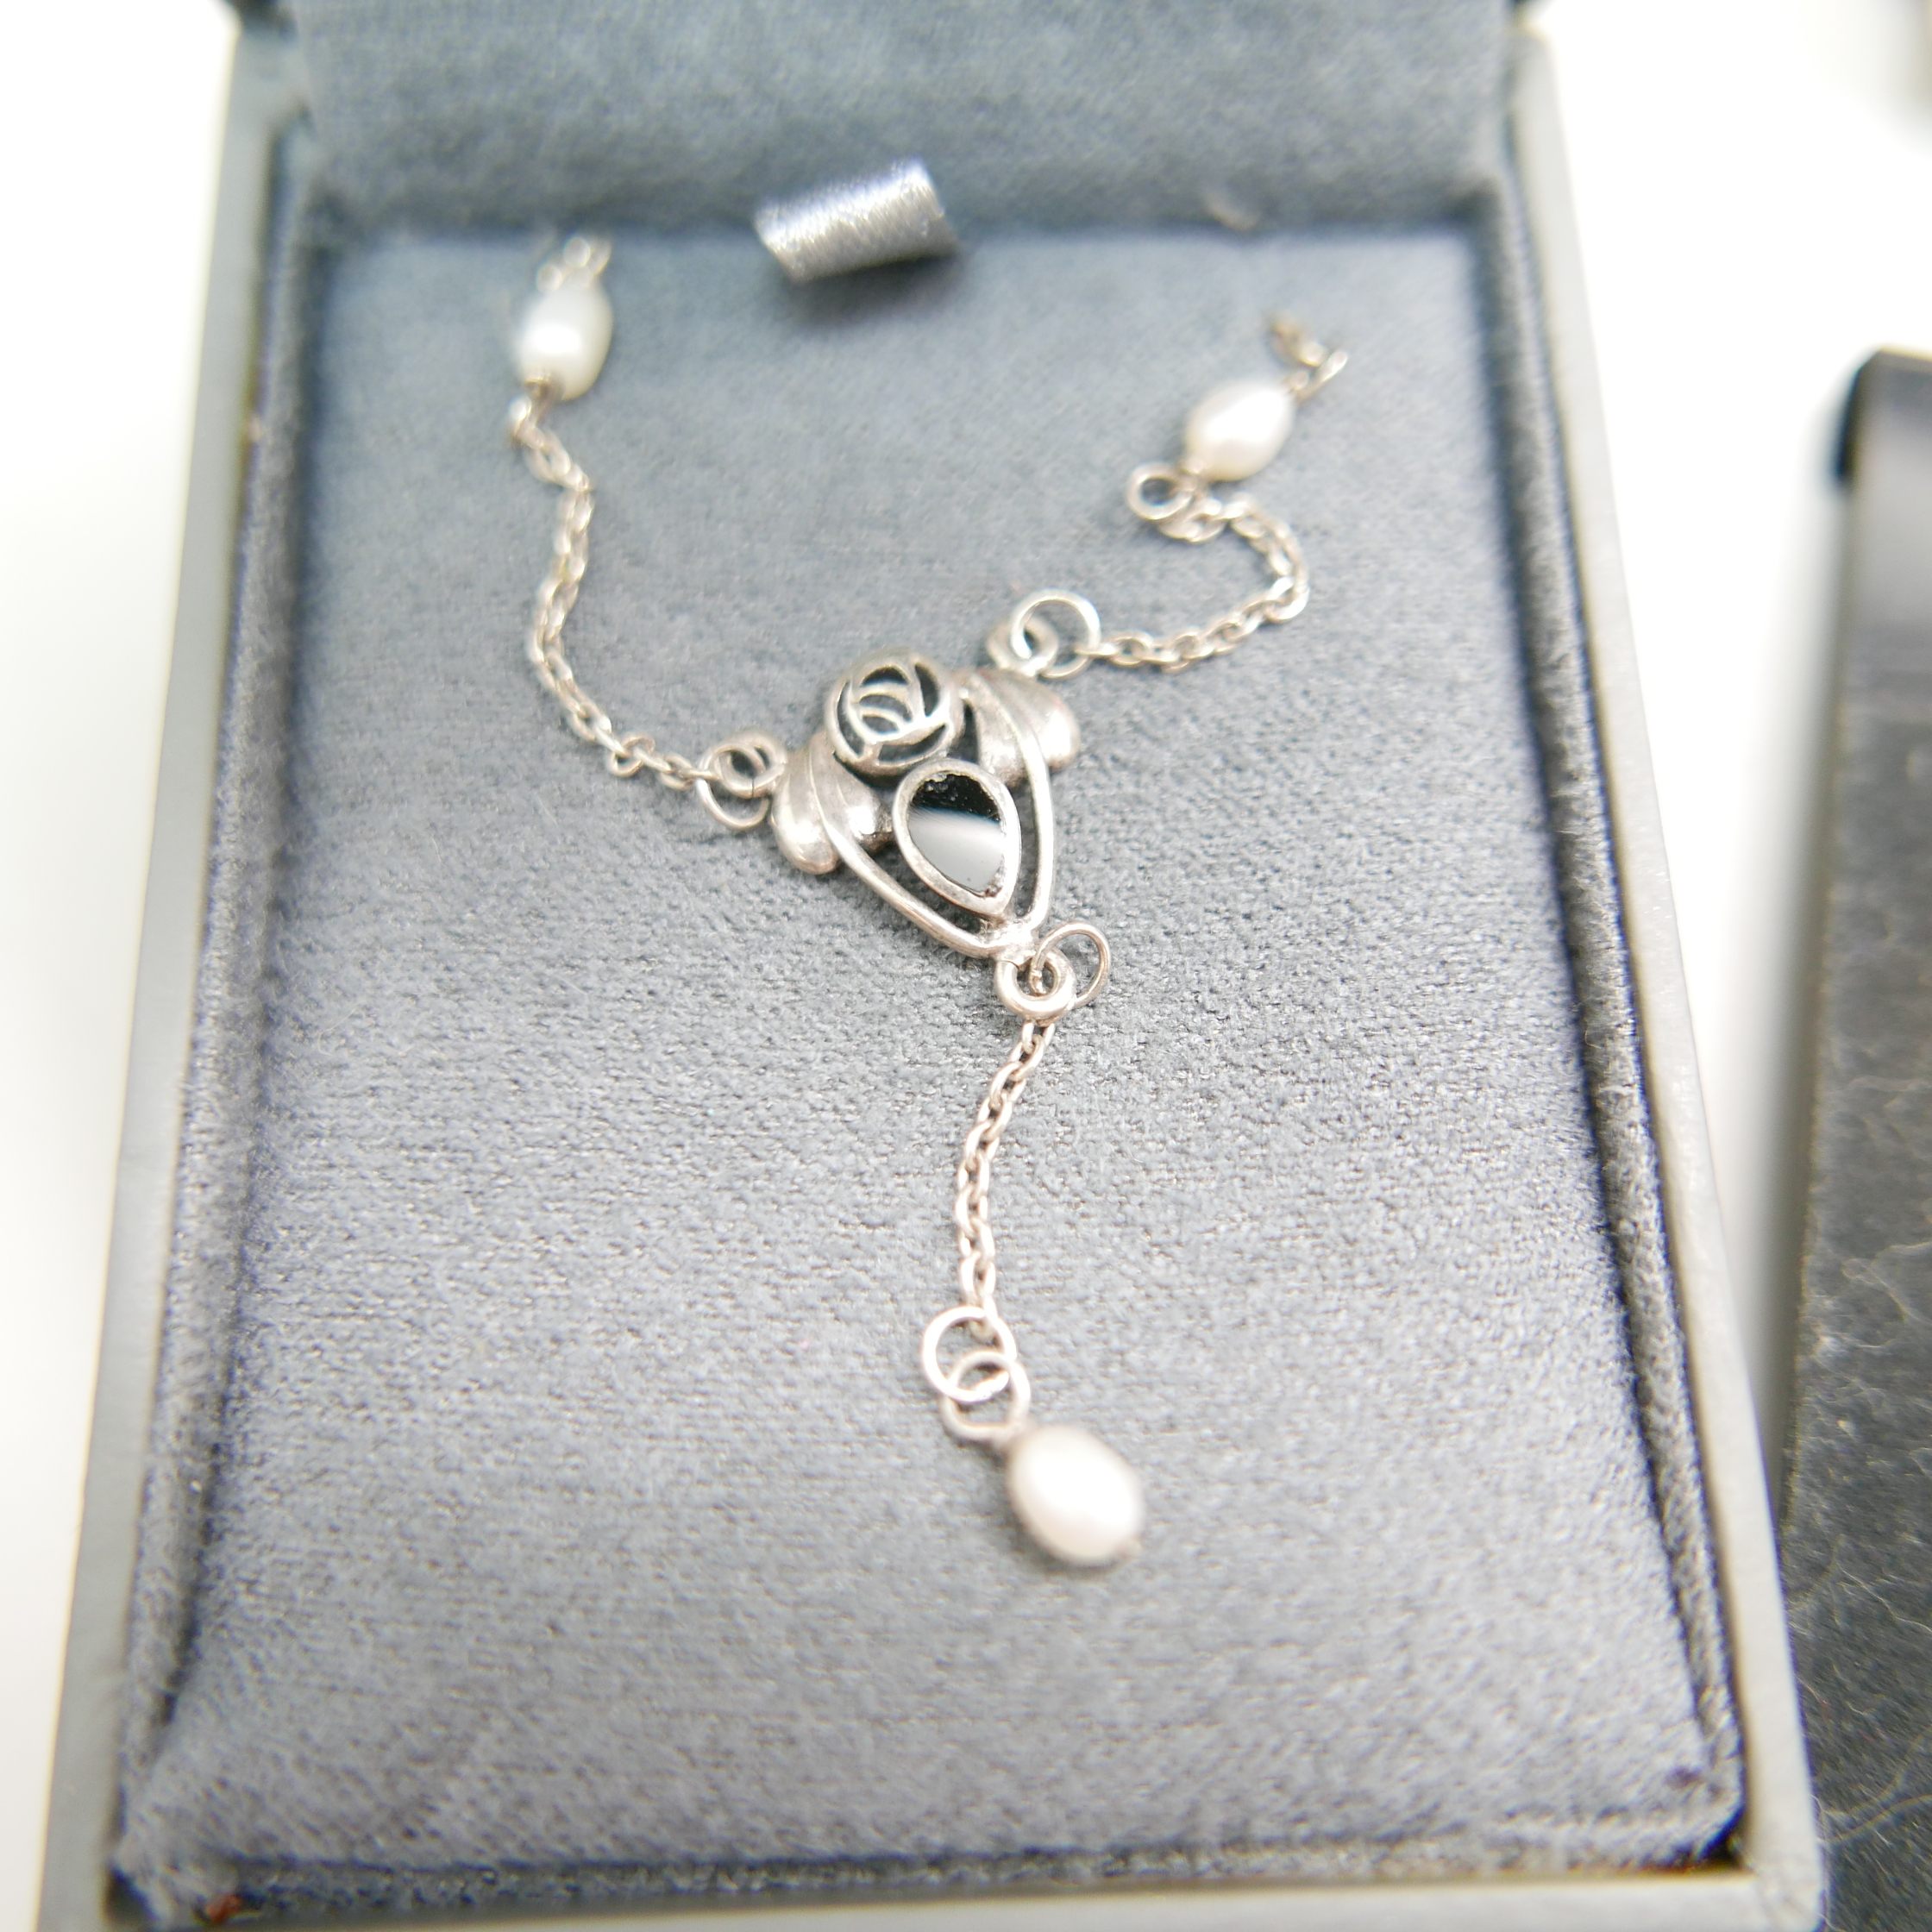 Two silver Celtic necklaces, earrings and a Sea Gems bookmark - Image 3 of 3